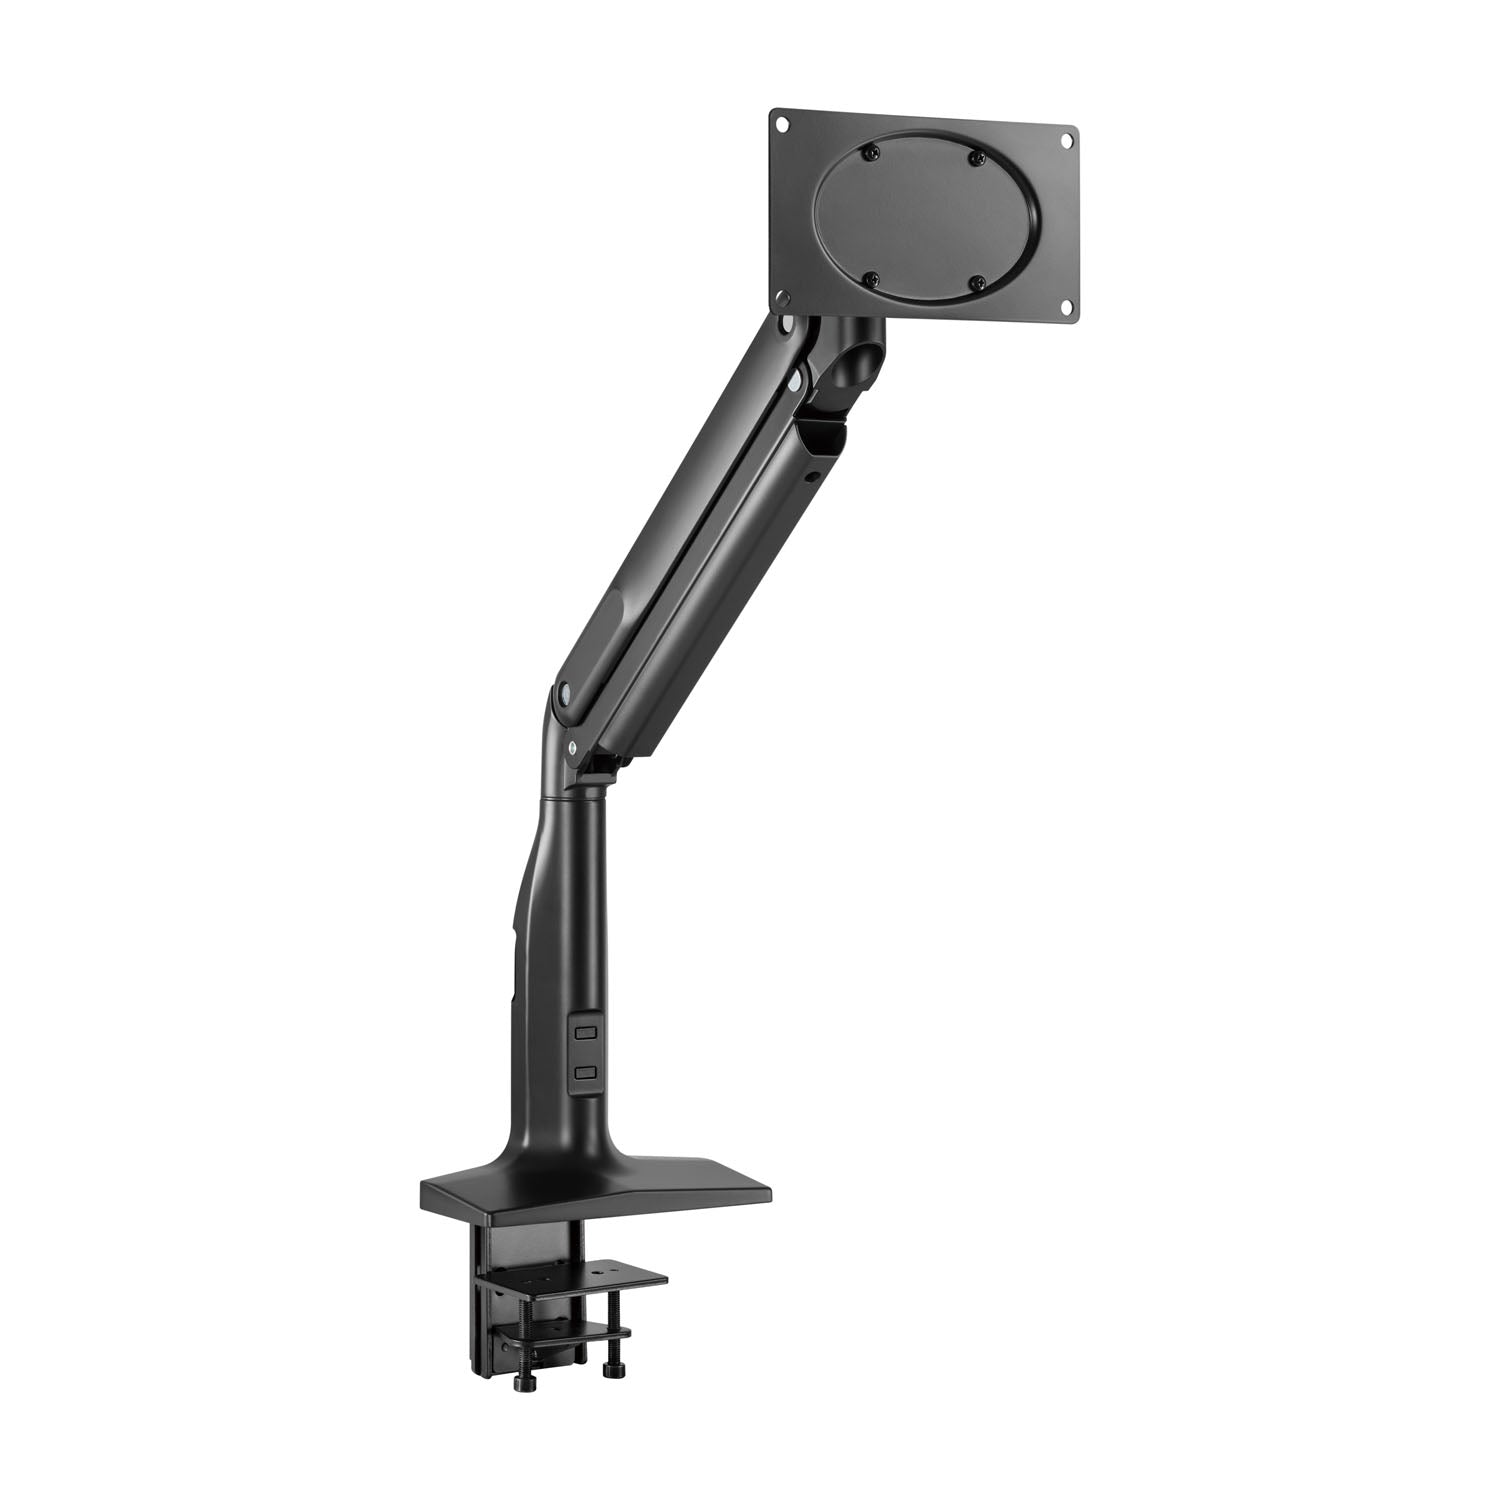 Gadgeton Versatile Single Monitor Arm, Stand And Mount For Gaming And Office Use 17